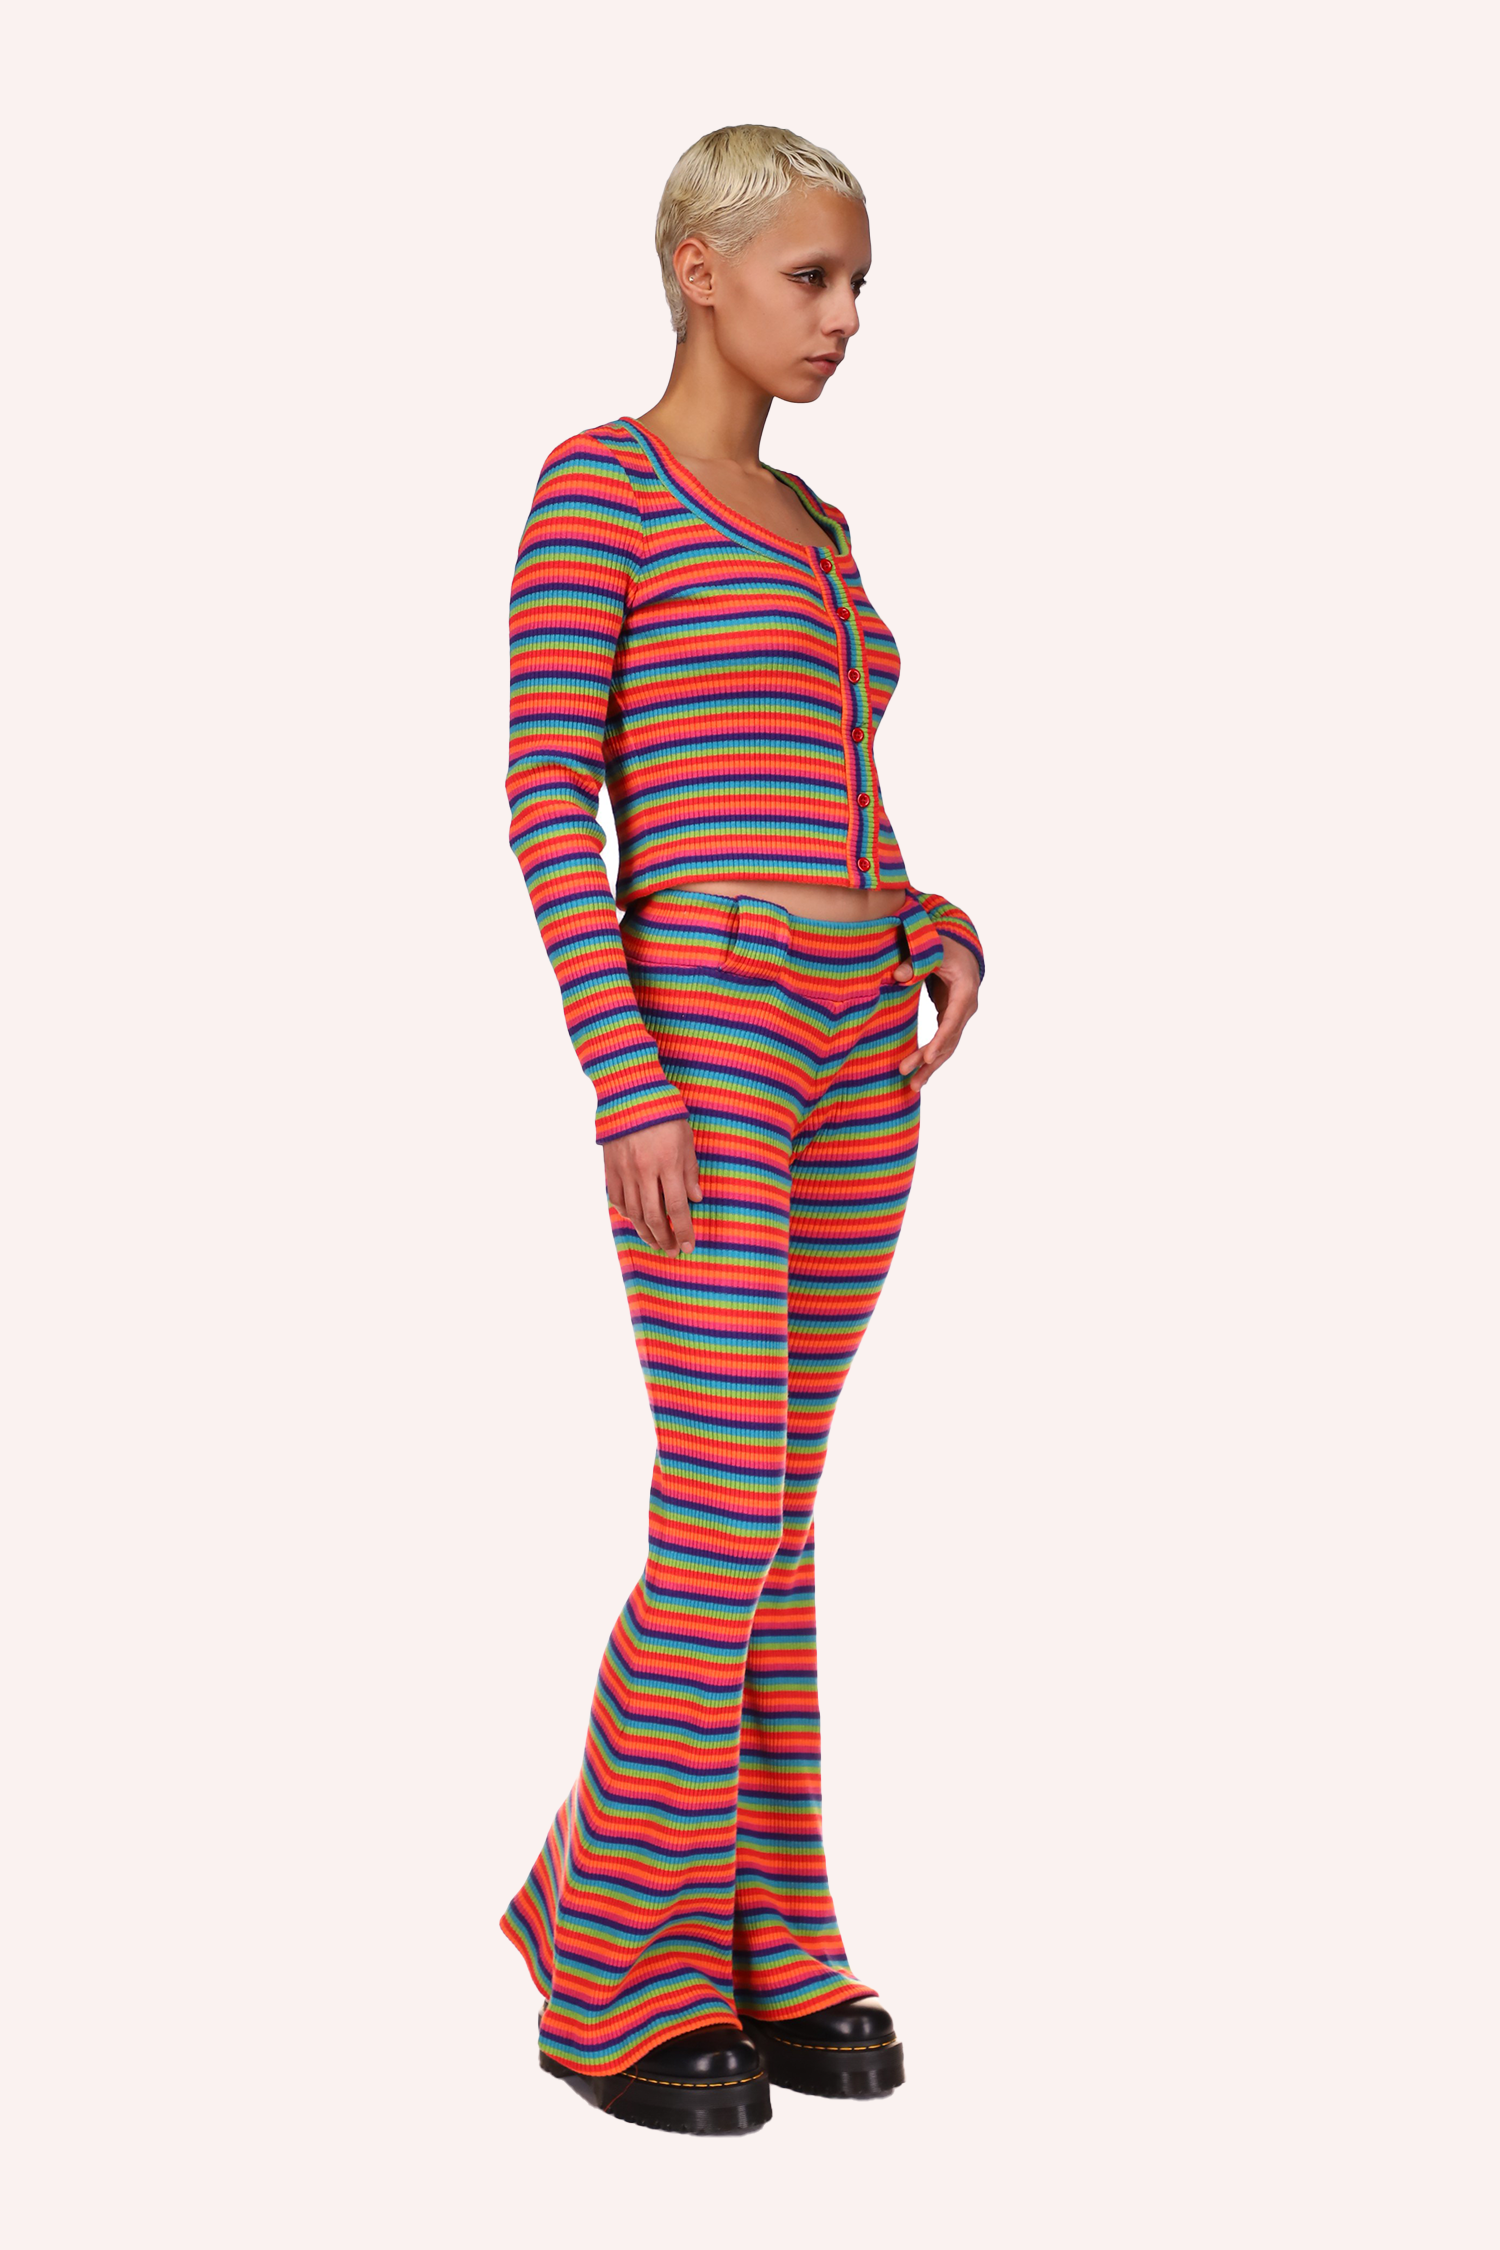 Rainbow Stripe Sweater goes to the hips and stops at the belly button, the sleeves are long and cover the wrists